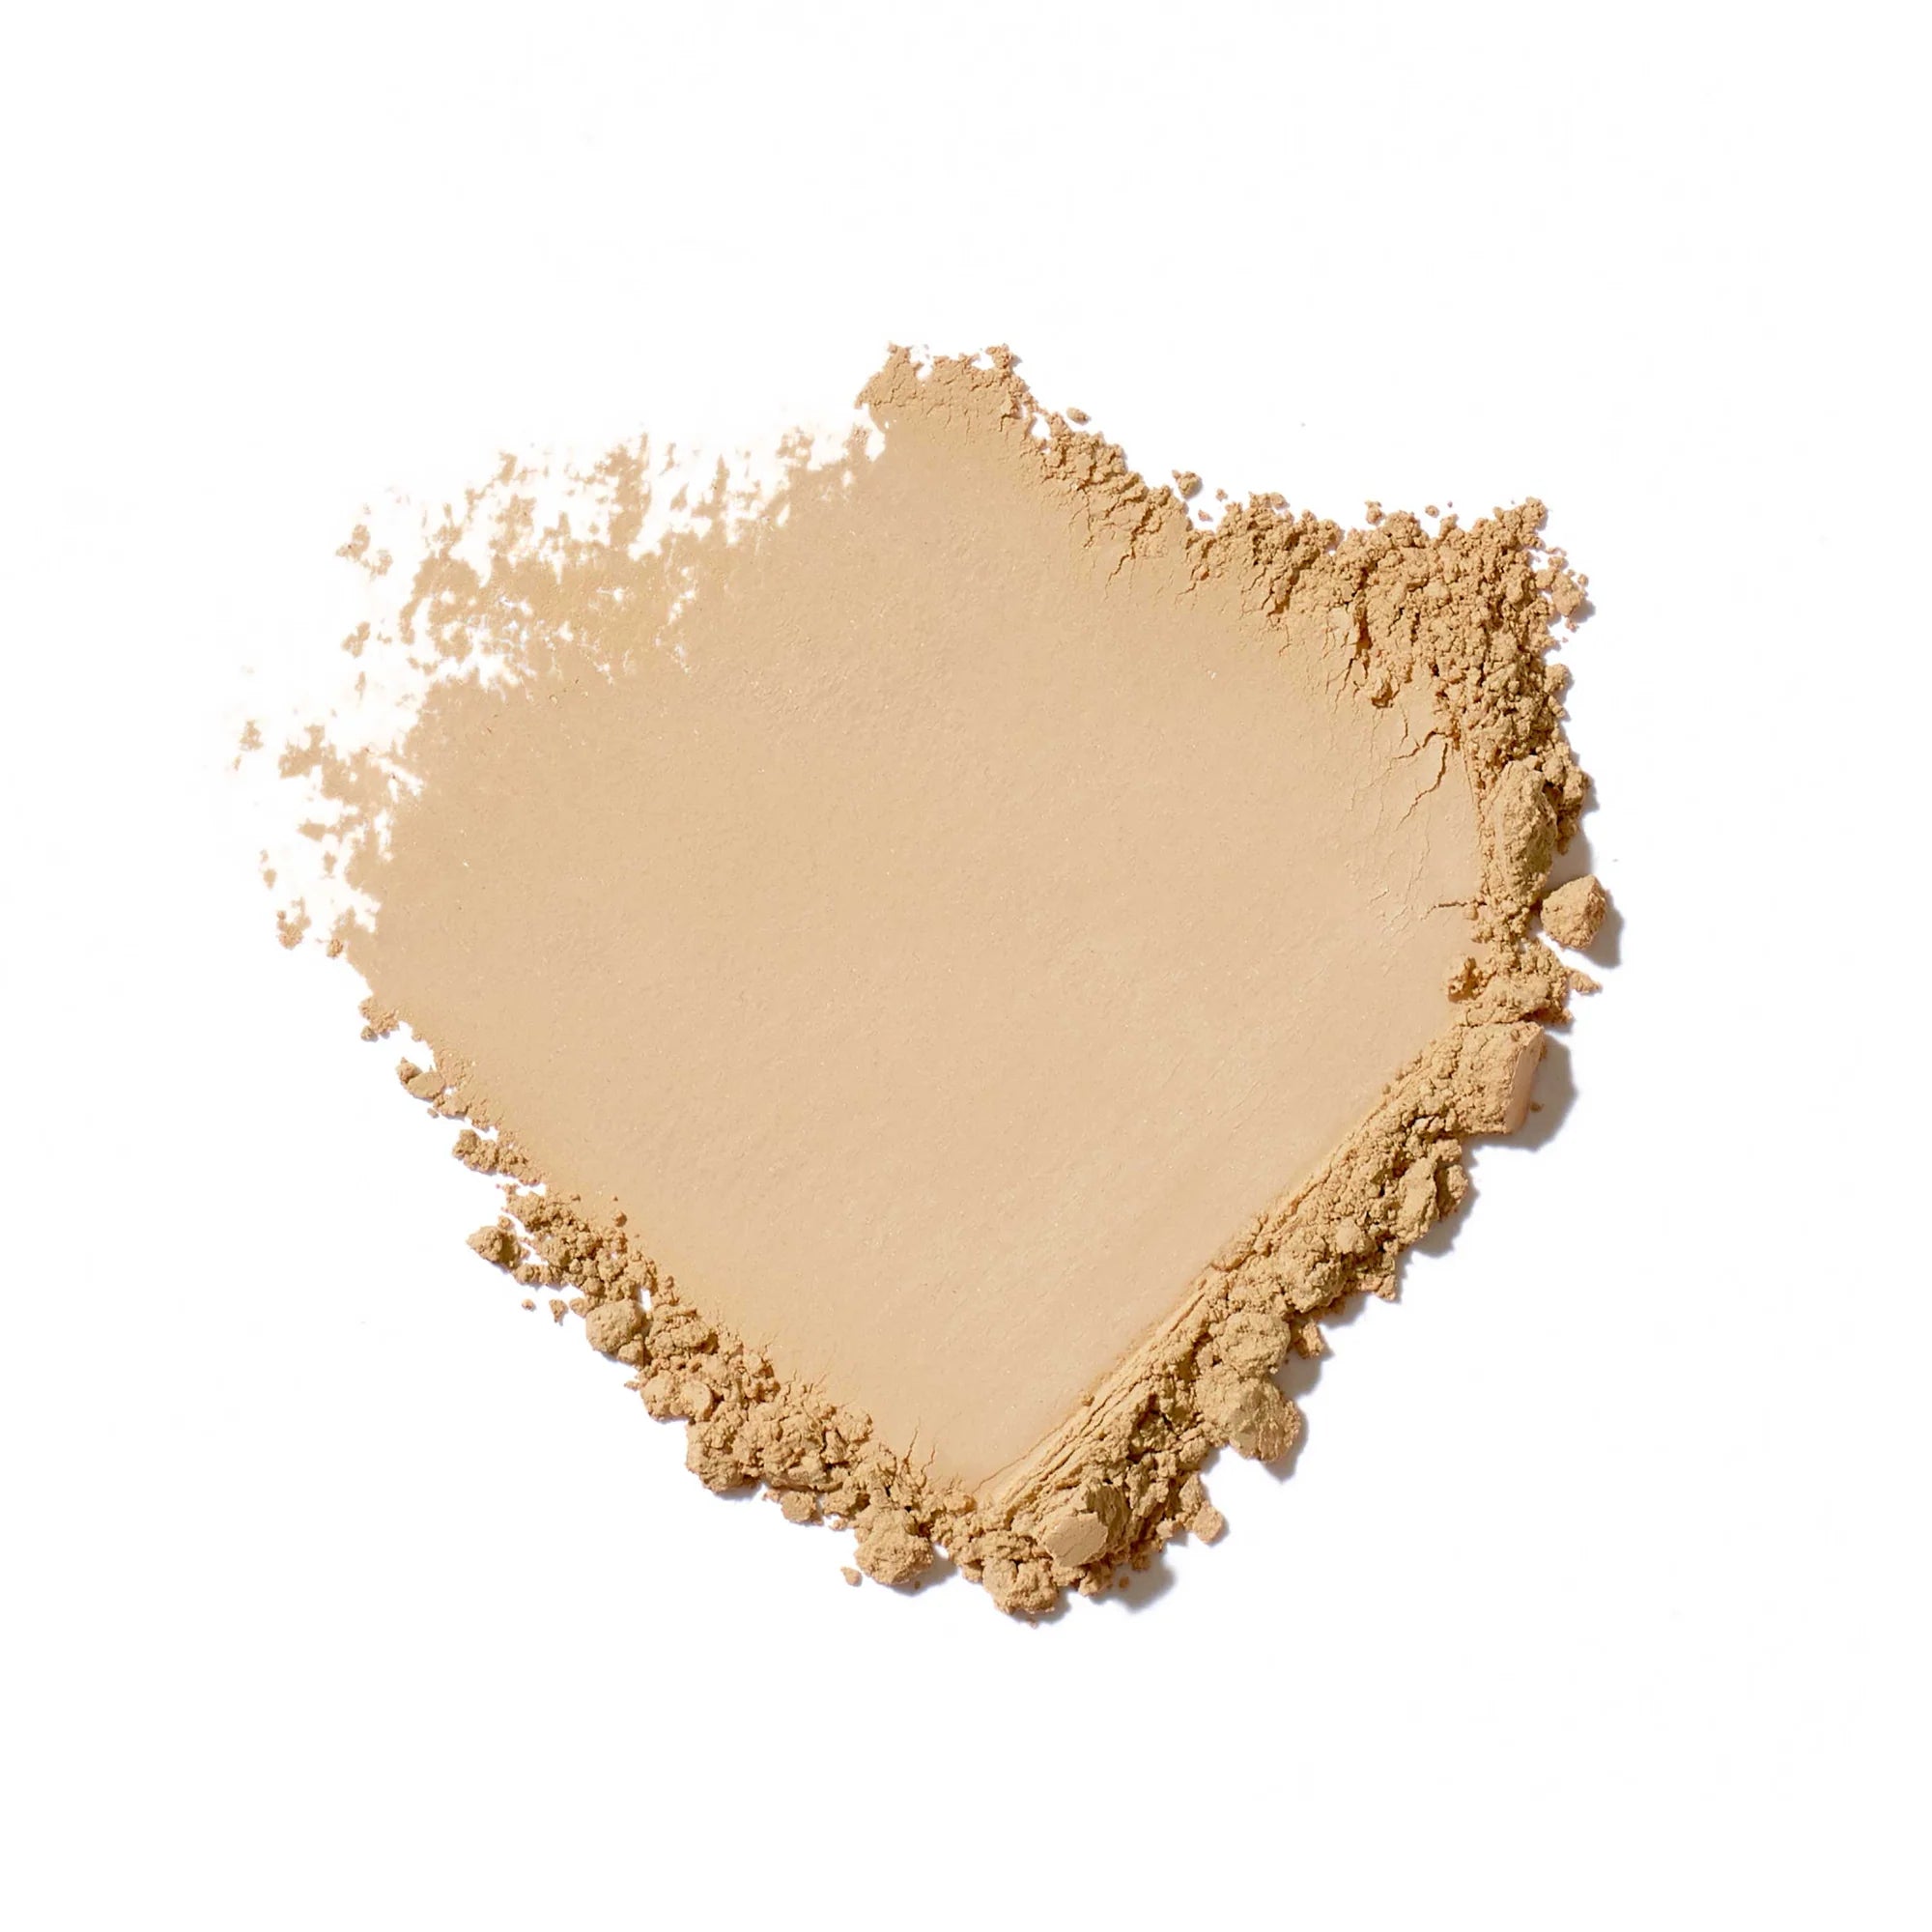 Jane Iredale's Amazing Base® Loose Mineral Powder SPF 20 - shade Warm Sienna - Medium Light with strong gold undertones